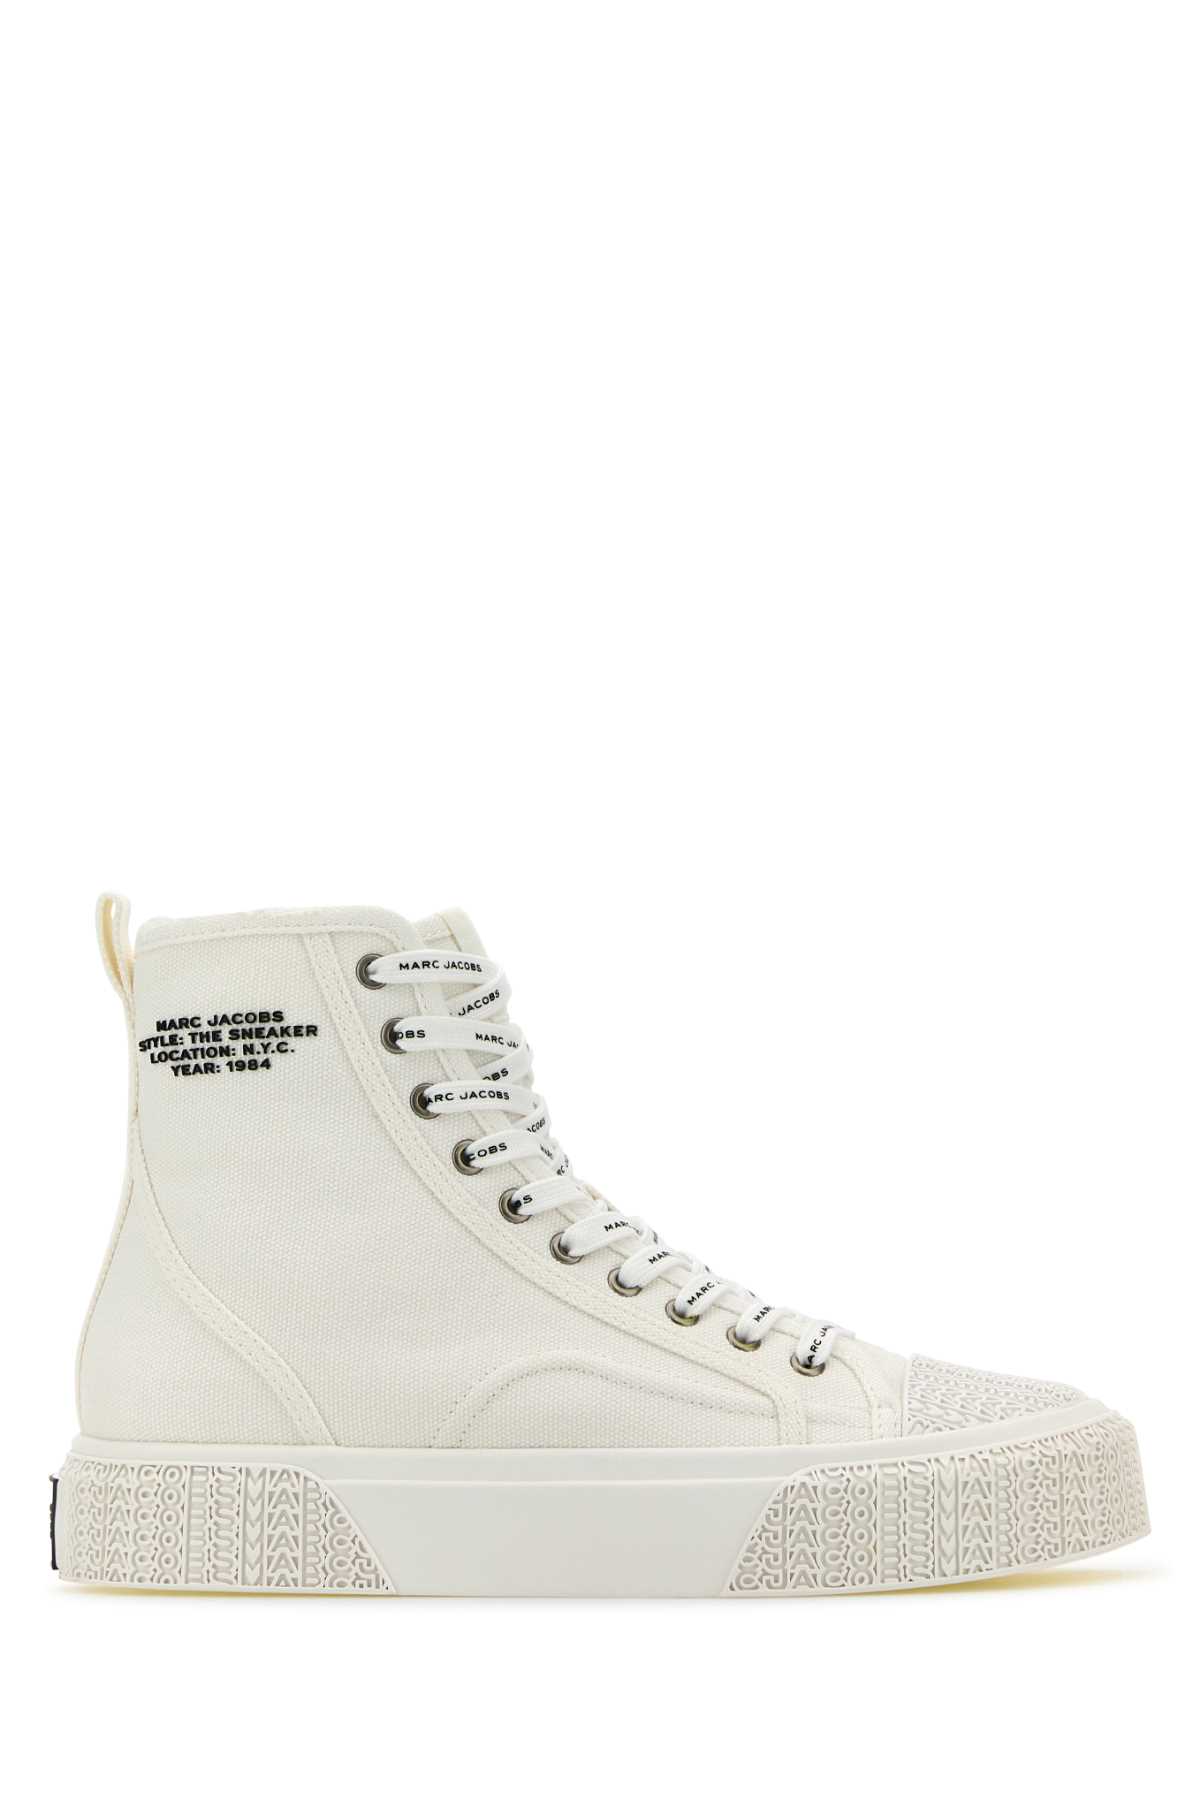 the High Top White Canvas Sneakers